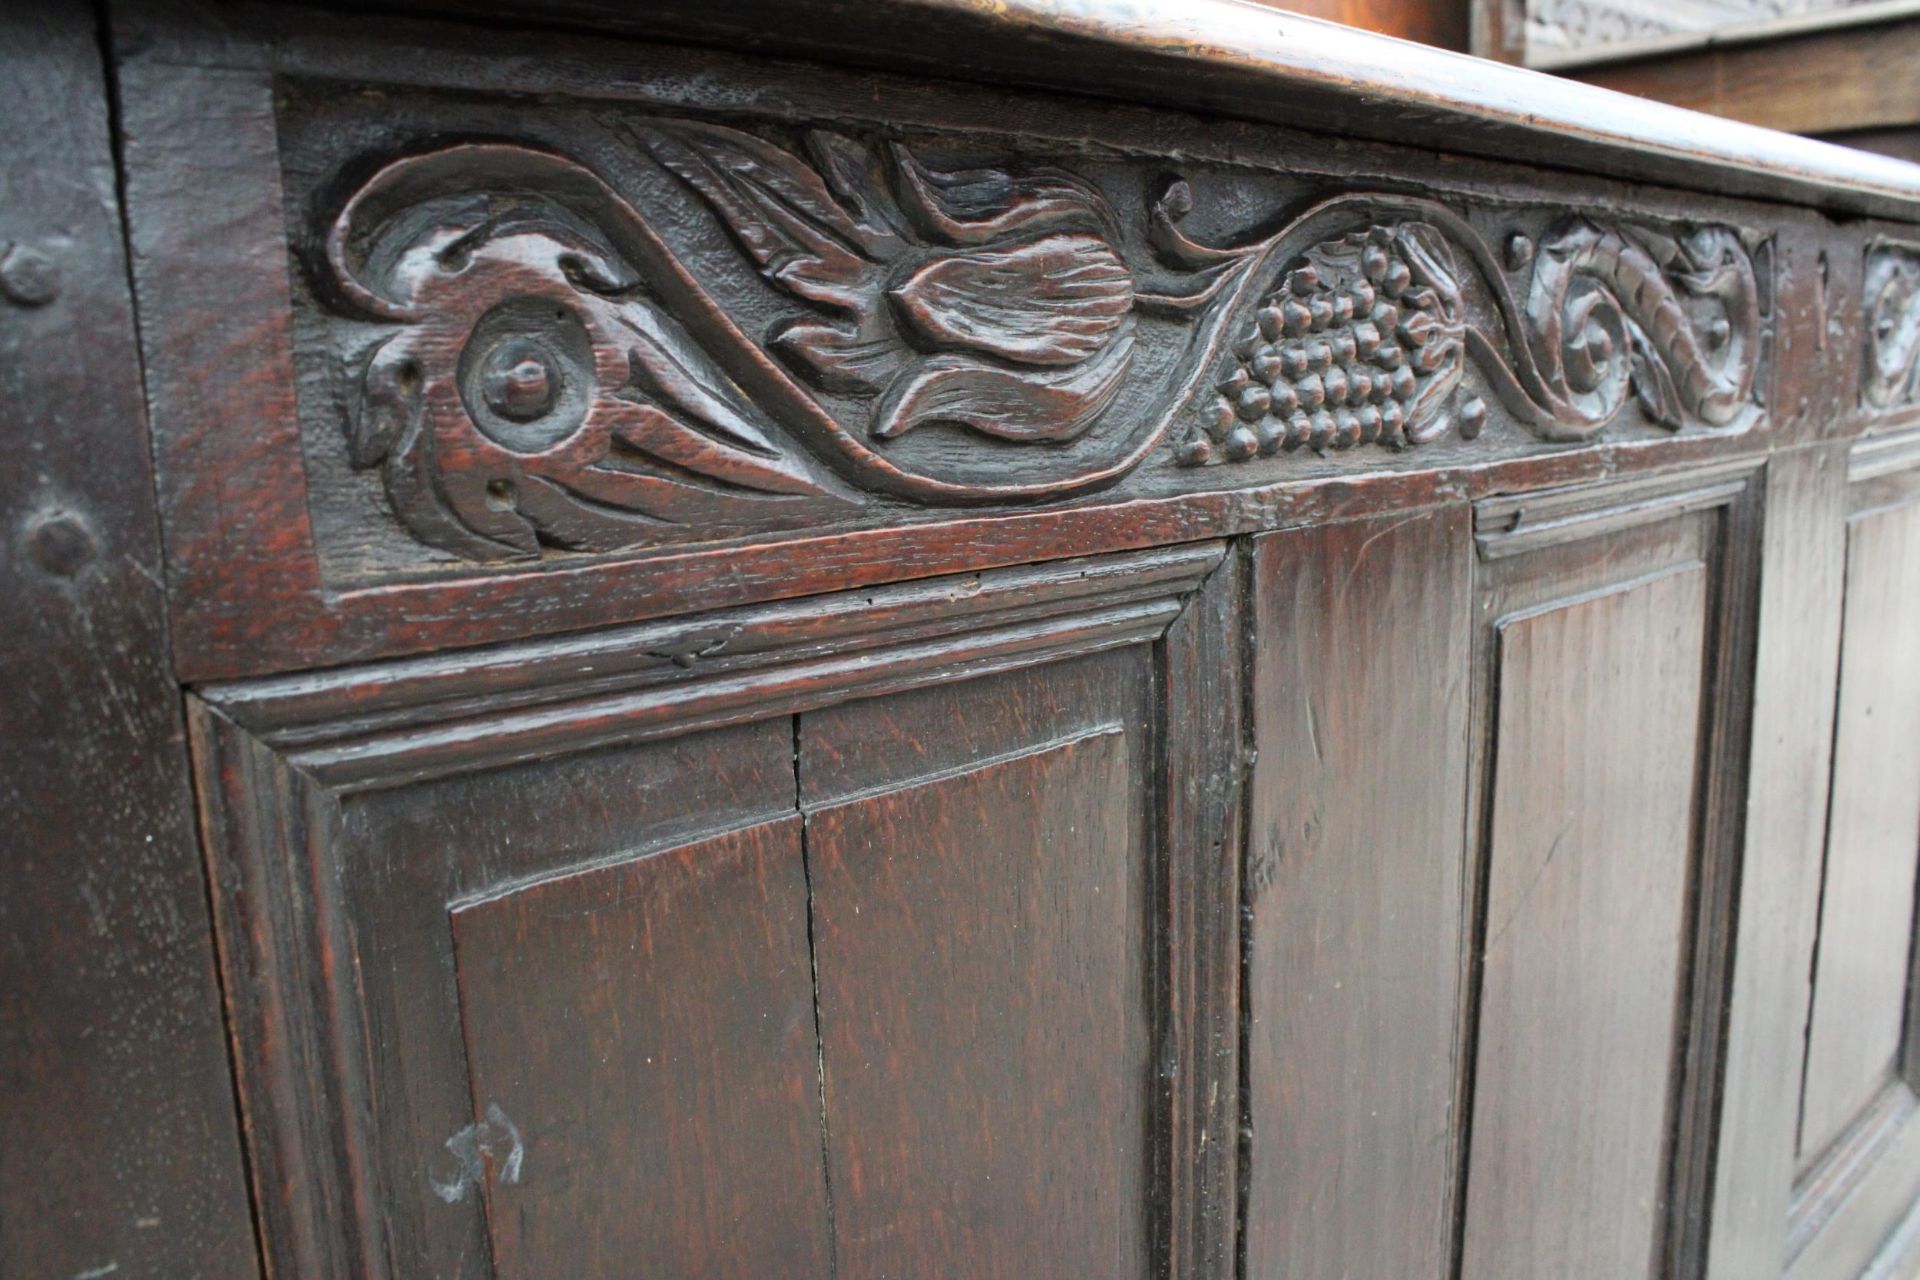 A GEORGIAN OAK BLANKET CHEST WITH FOUR PANEL FRONT ND FOLIAGE FRIEZE CARVING, 61" WIDE - Image 5 of 5